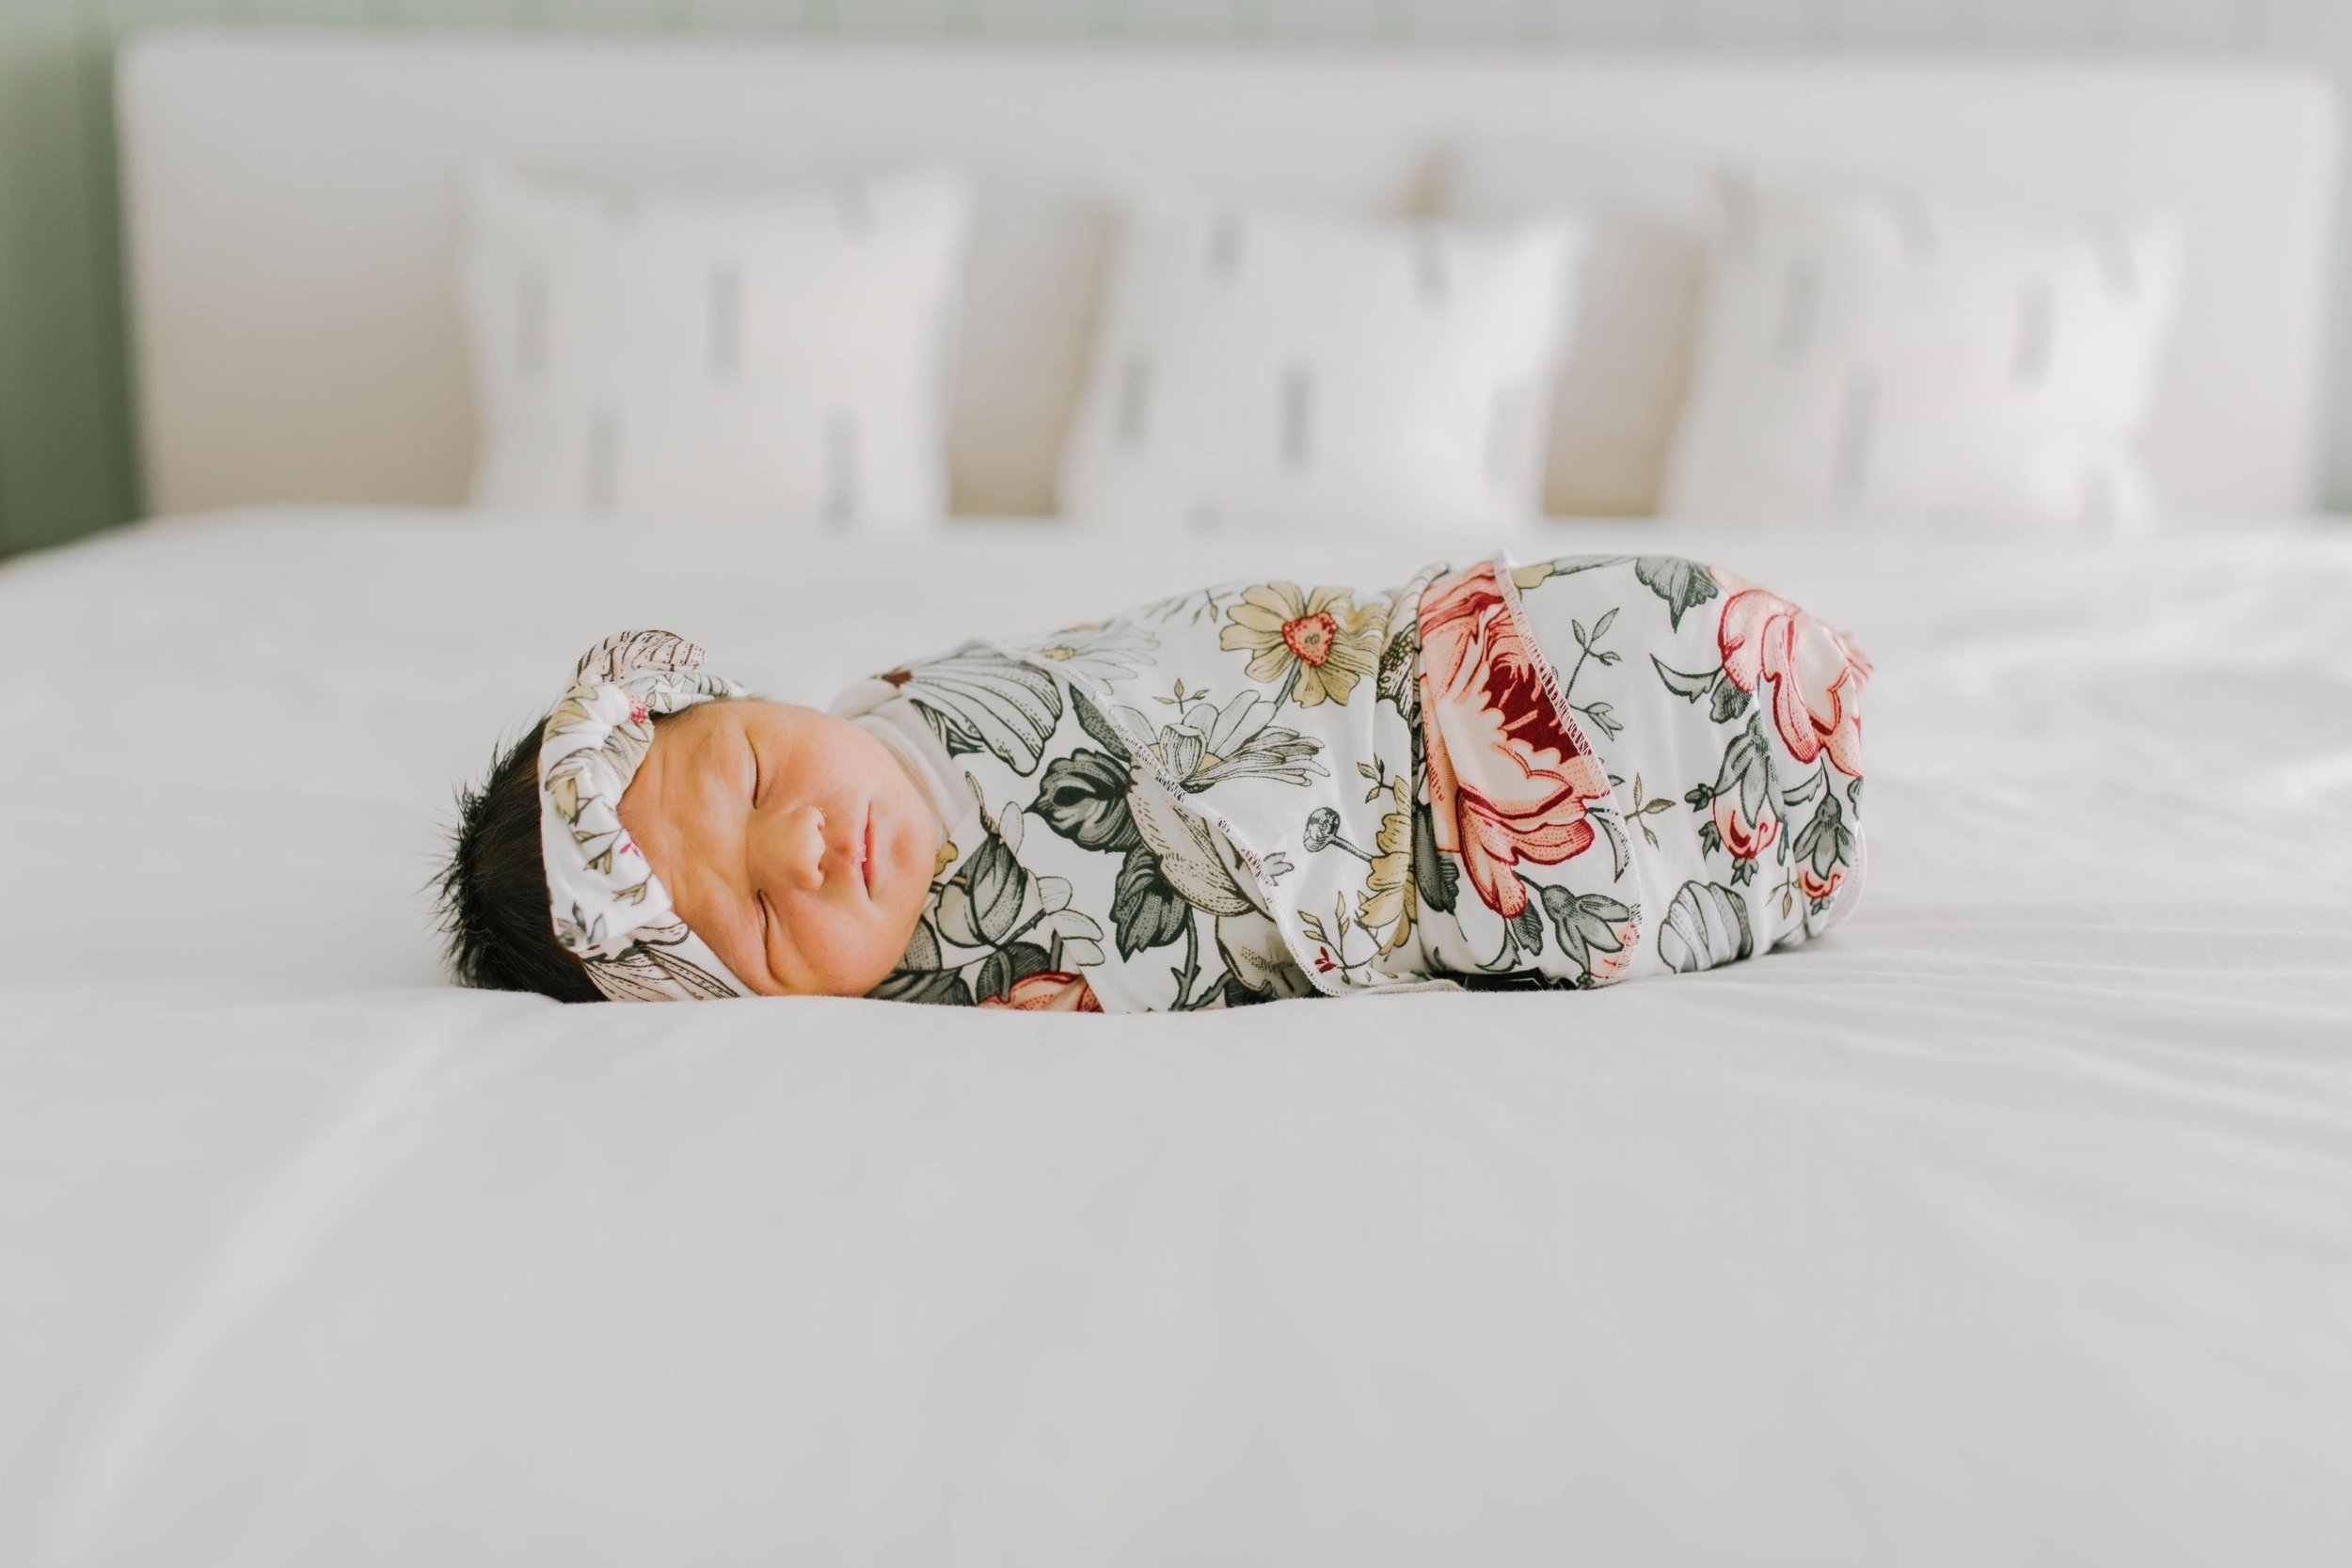 Ditch the Hospital Gown: Why birthing in your own clothes matters